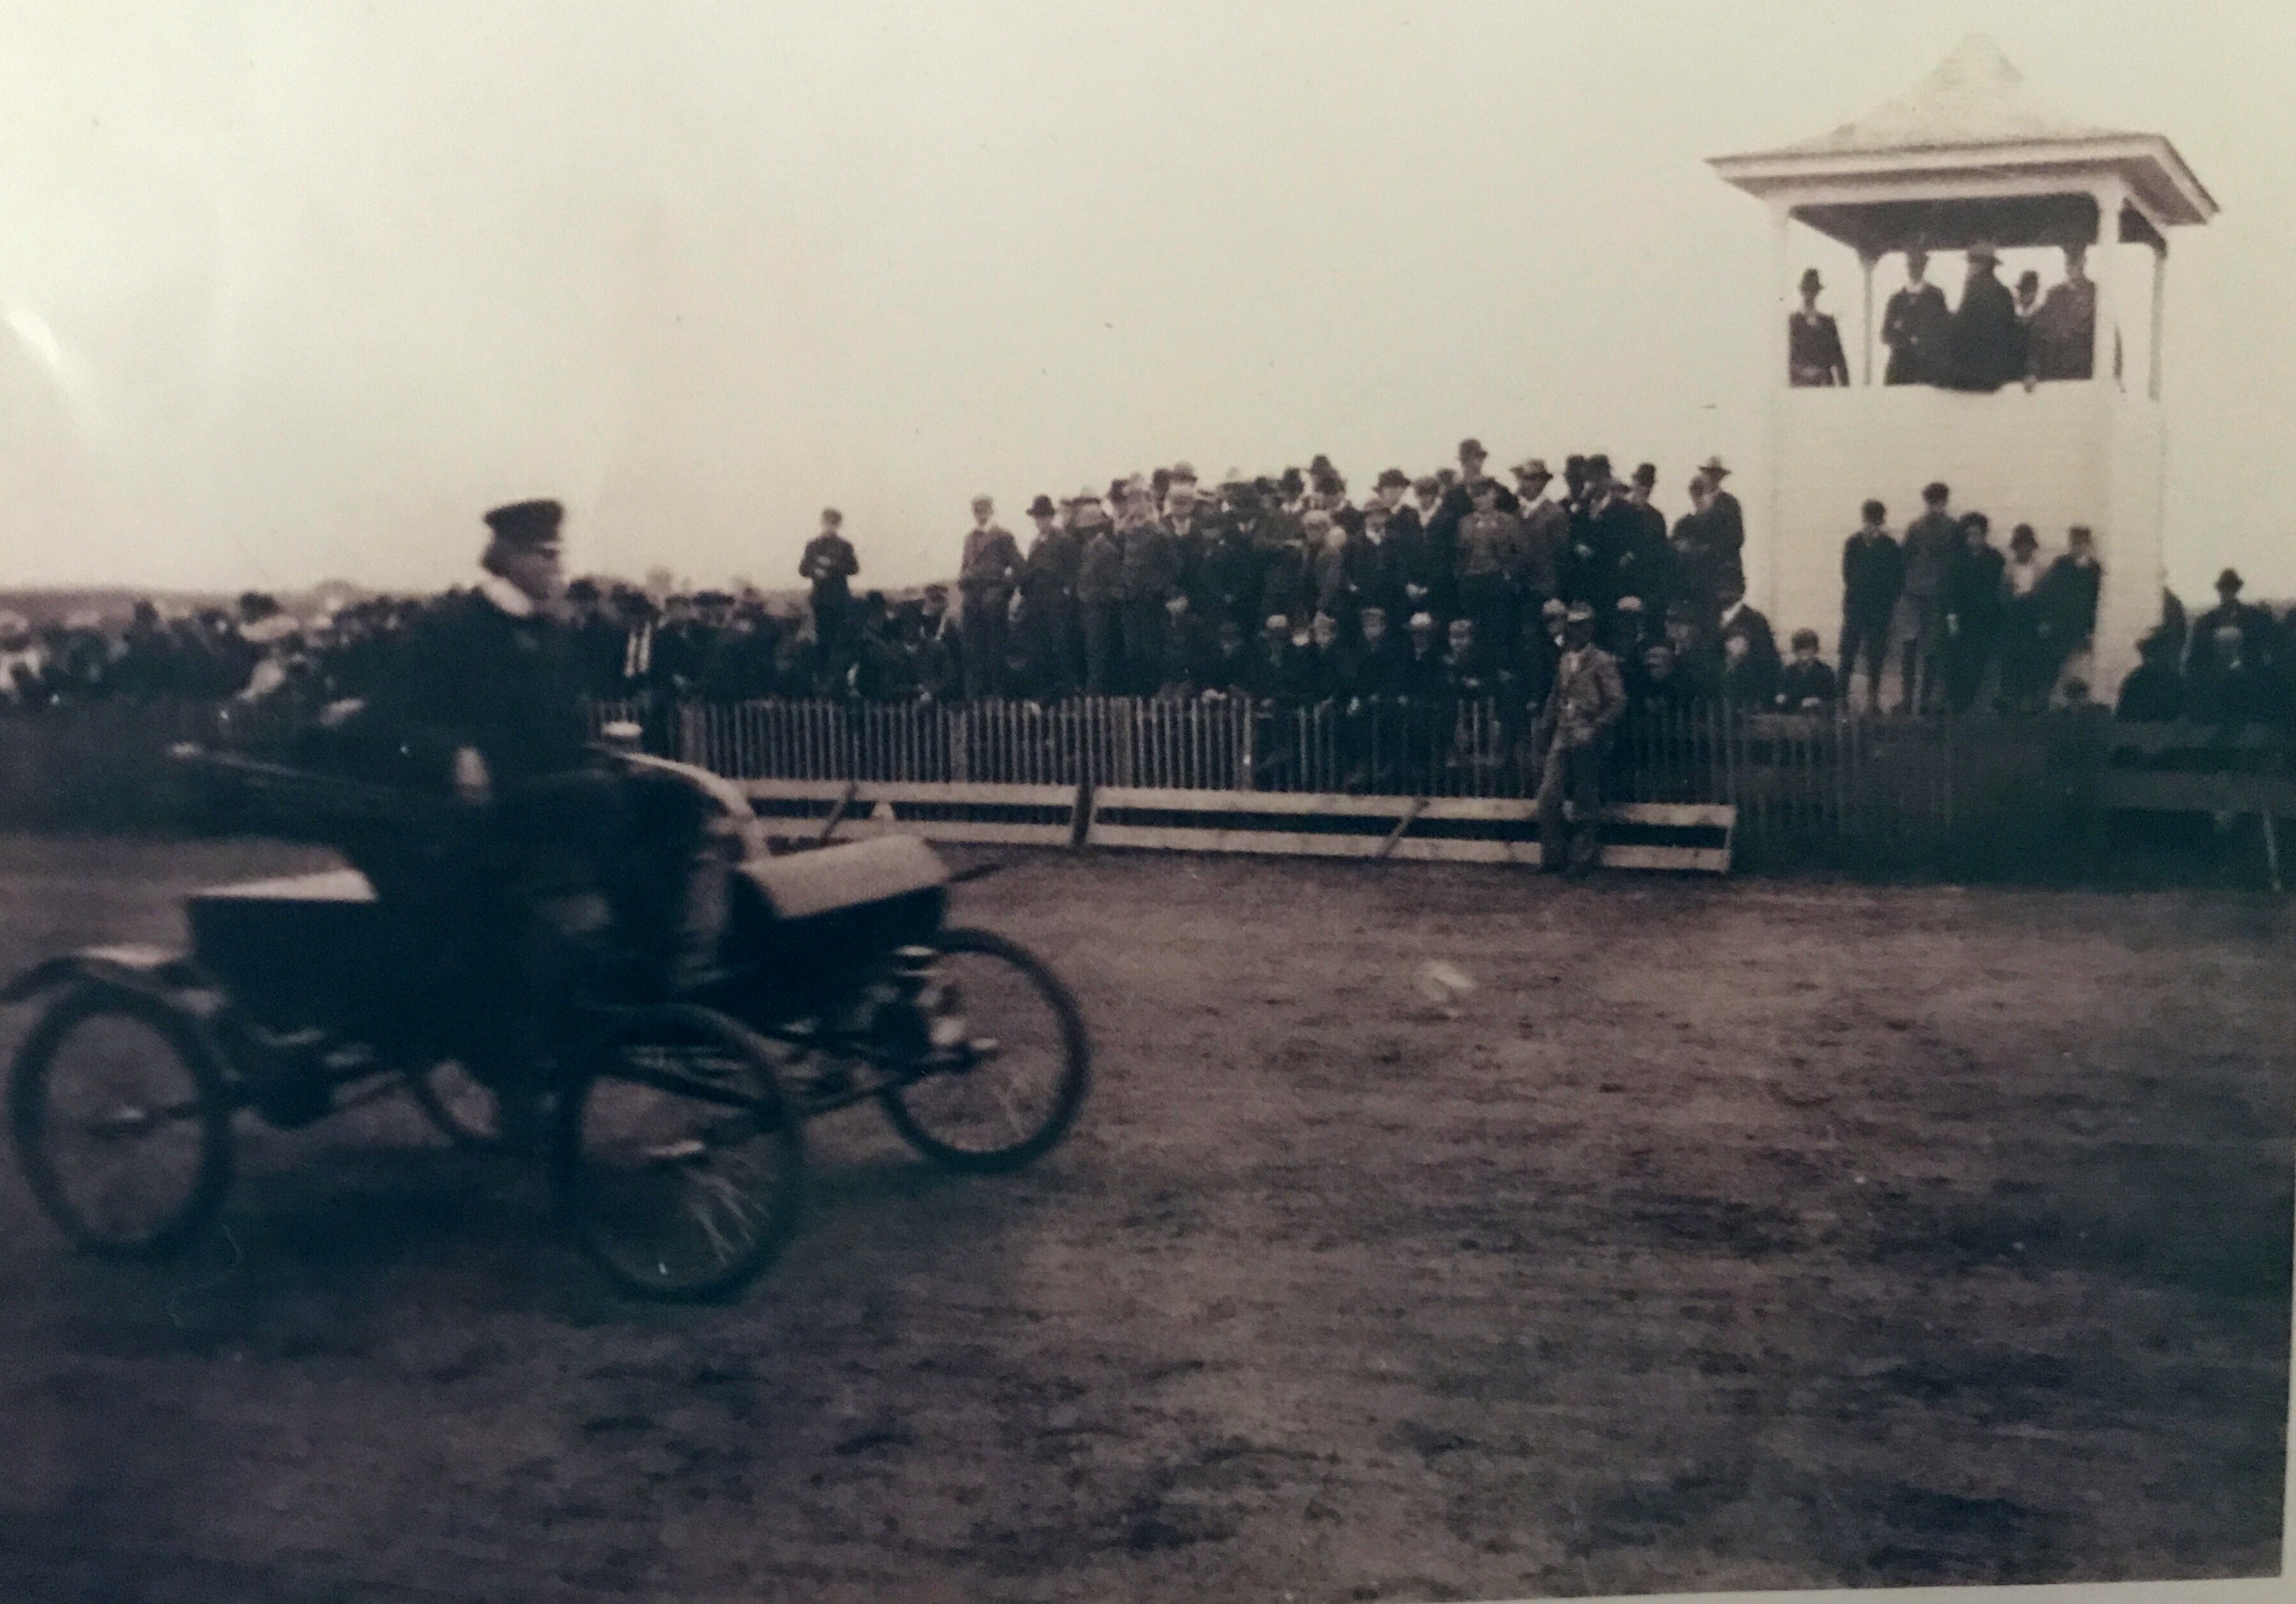 September 1902. Grandpa Fred C. Shardlow demonstrating his first car, an Oldsmobile, at county fair at Hutchison, MN. Car was purchased in November 1901. 